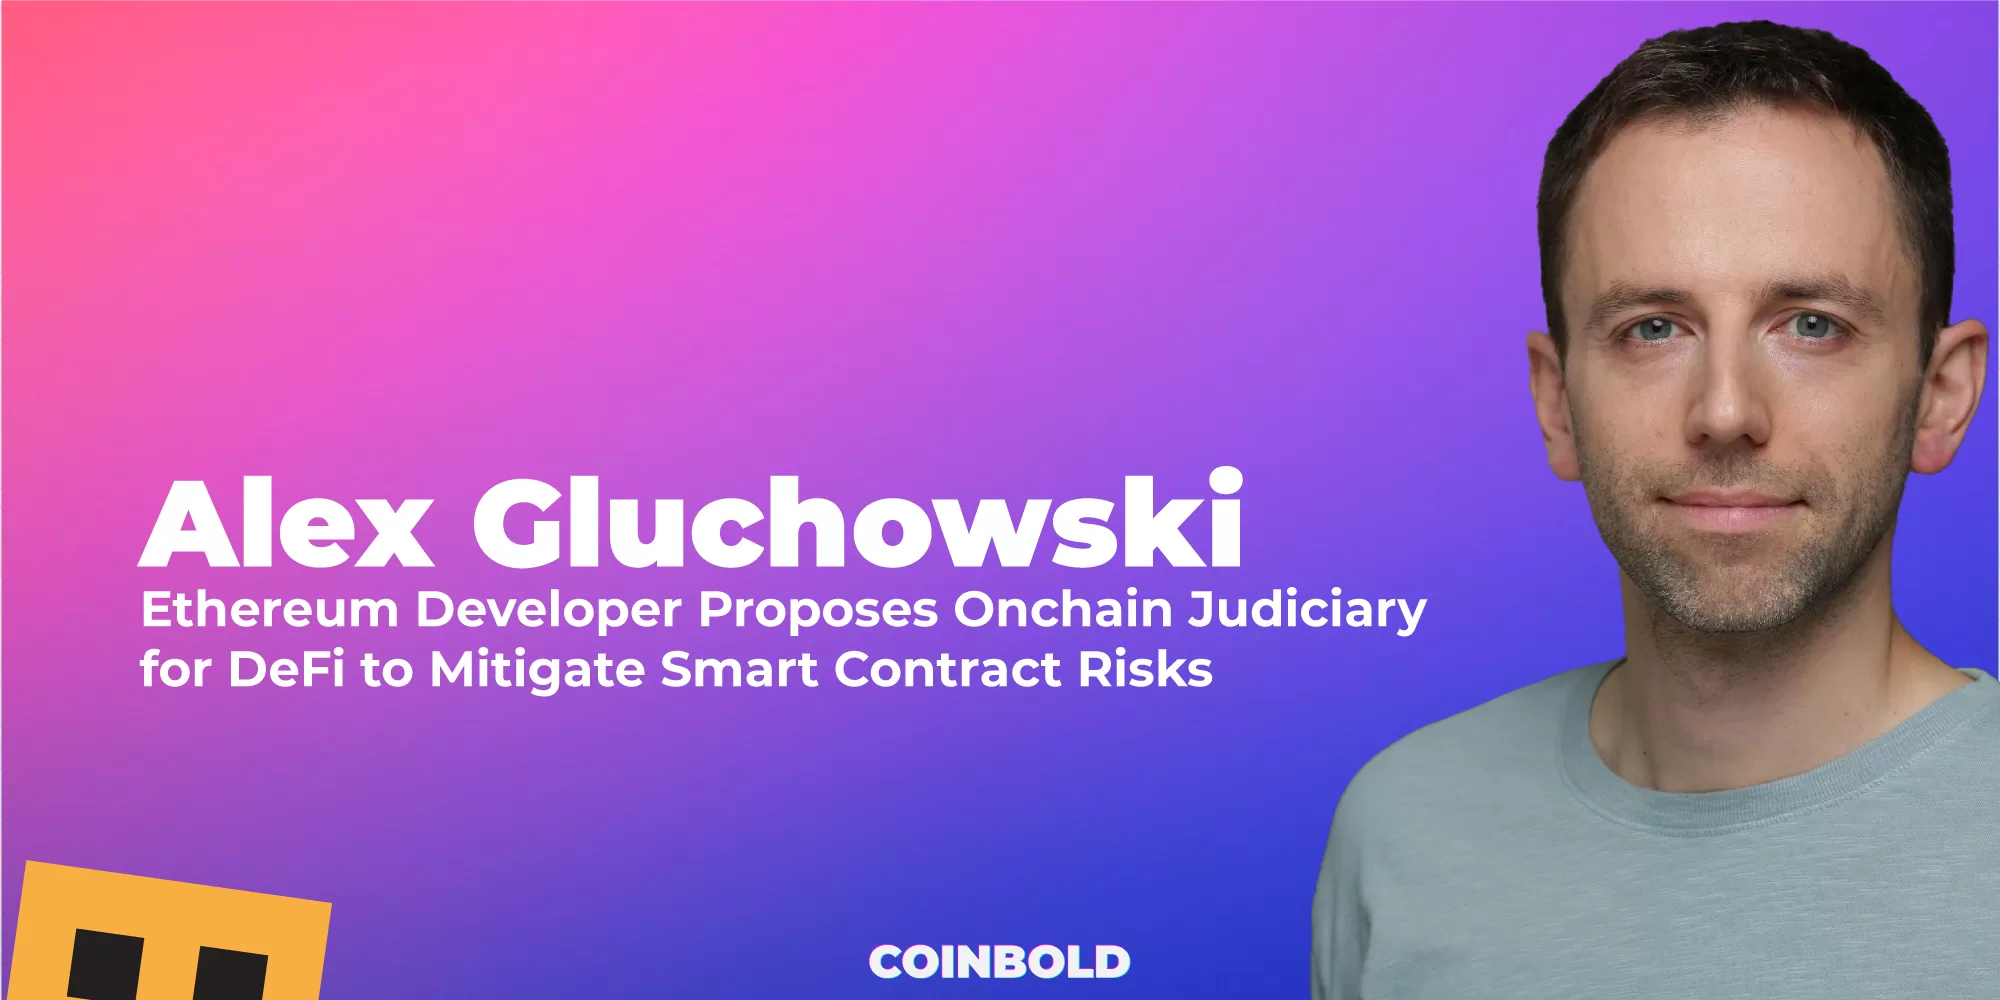 Ethereum Developer Proposes Onchain Judiciary for DeFi to Mitigate Smart Contract Risks jpg.webp